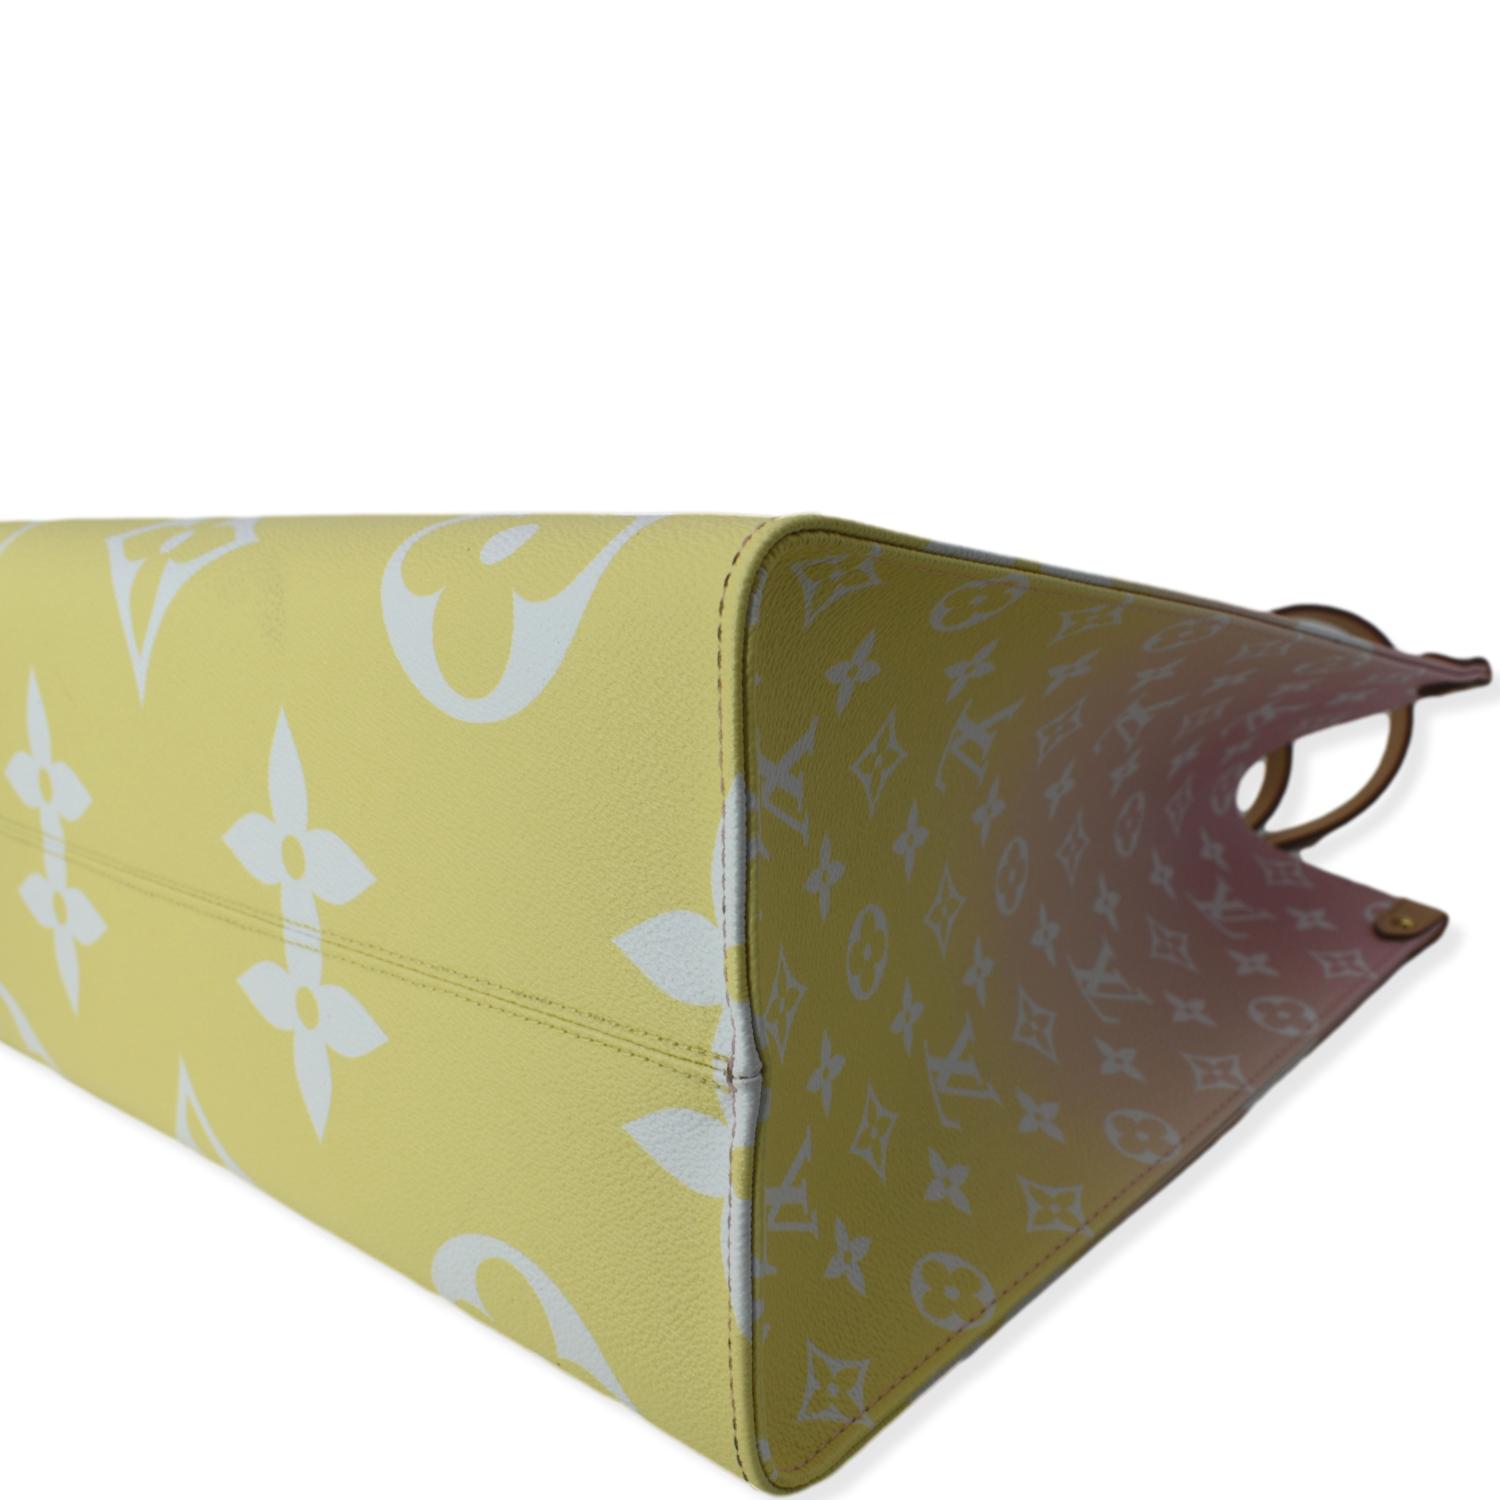 Louis Vuitton Light Pink And Yellow Giant Monogram Coated Canvas